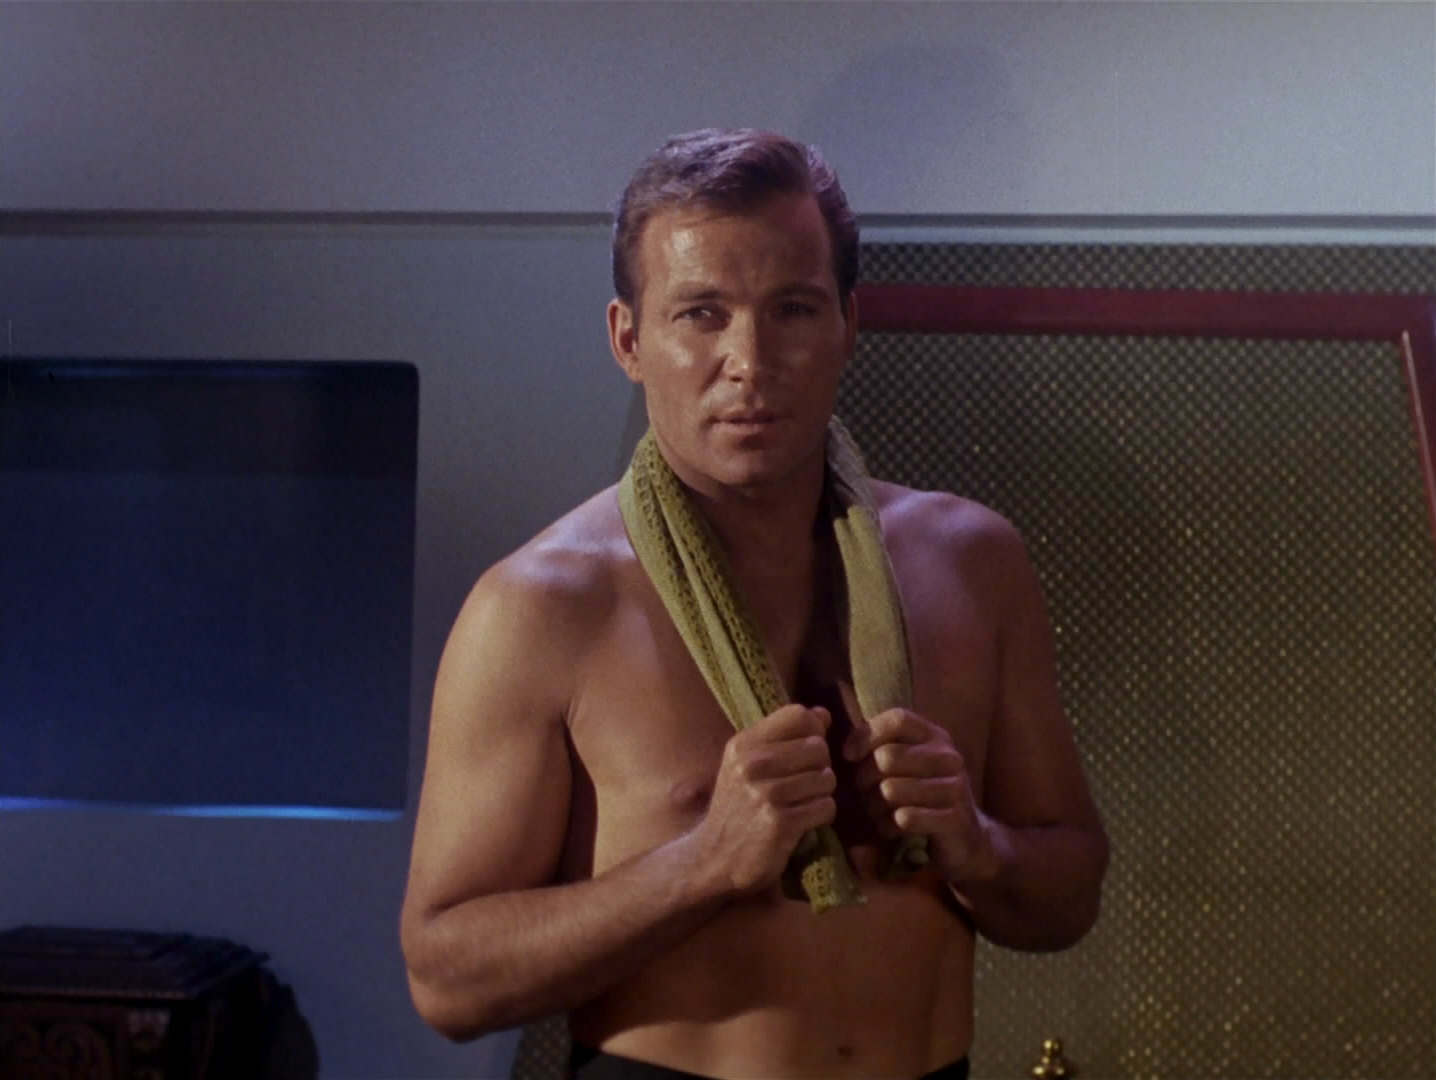 William shatner shirtless - 🧡 So I bought the home gym. 